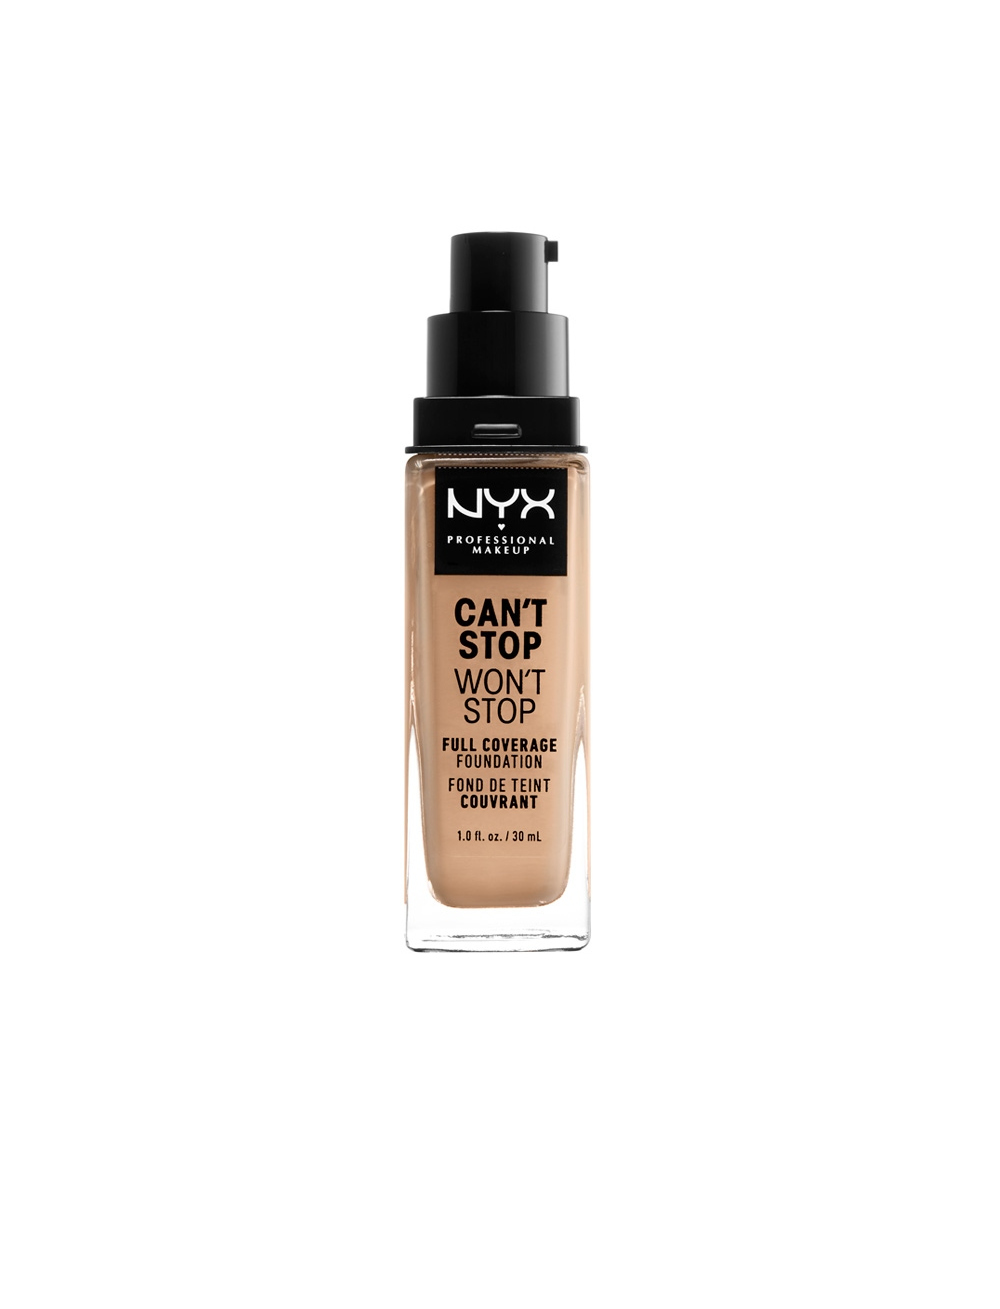 NYX professional make-up can't stop won't stop full coverage foundation #true beige